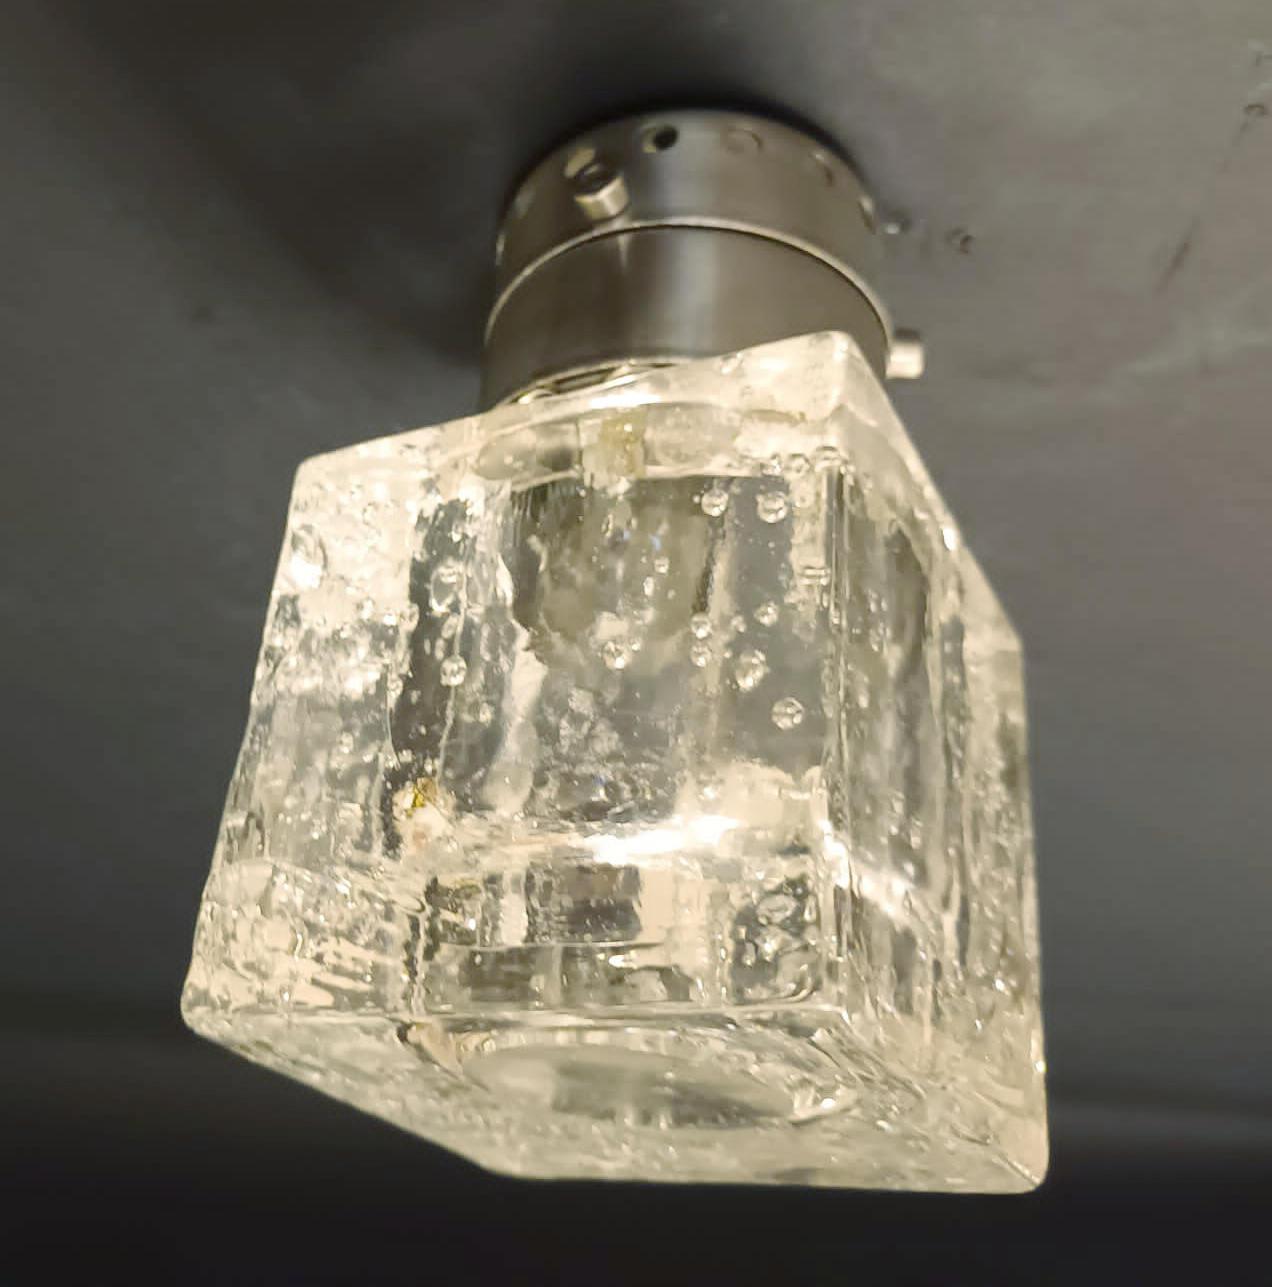 Vintage Italian spot light which can be used as a wall light or flush mount, with a single clear cubic Murano glass shade hand blown with bubbles inside the glass using bollicine technique, mounted on nickel frame / Made in Italy by Sciolari, circa